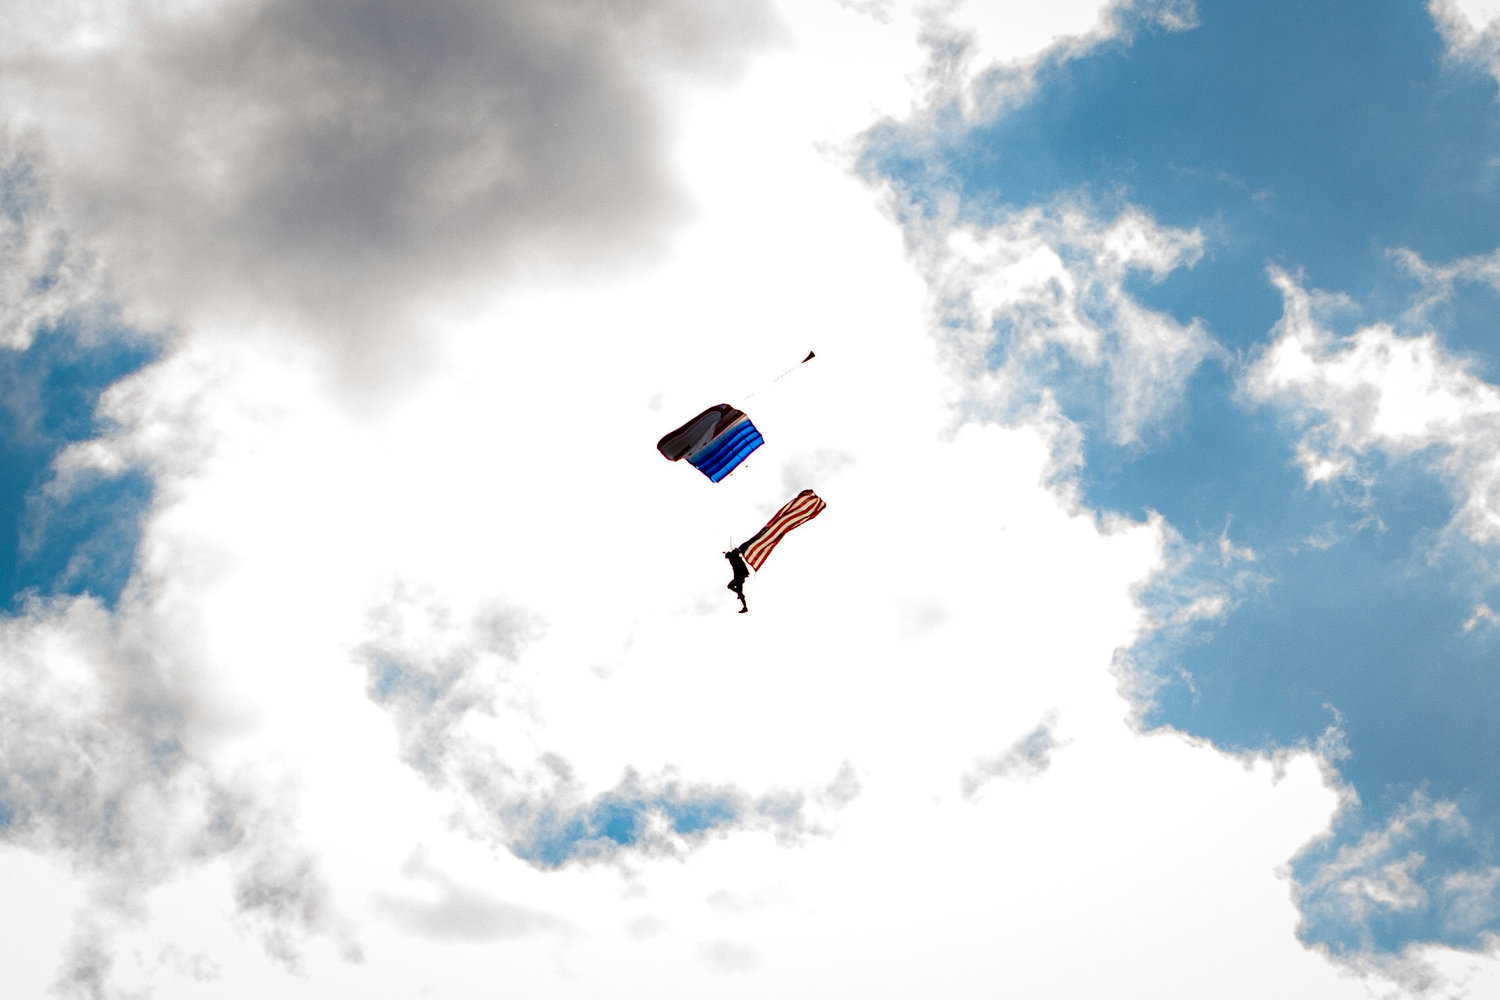 A skydiver from Skydive Toledo makes a jump over the Relay for Life event held at the Southwest Washington Fairgrounds Friday evening.